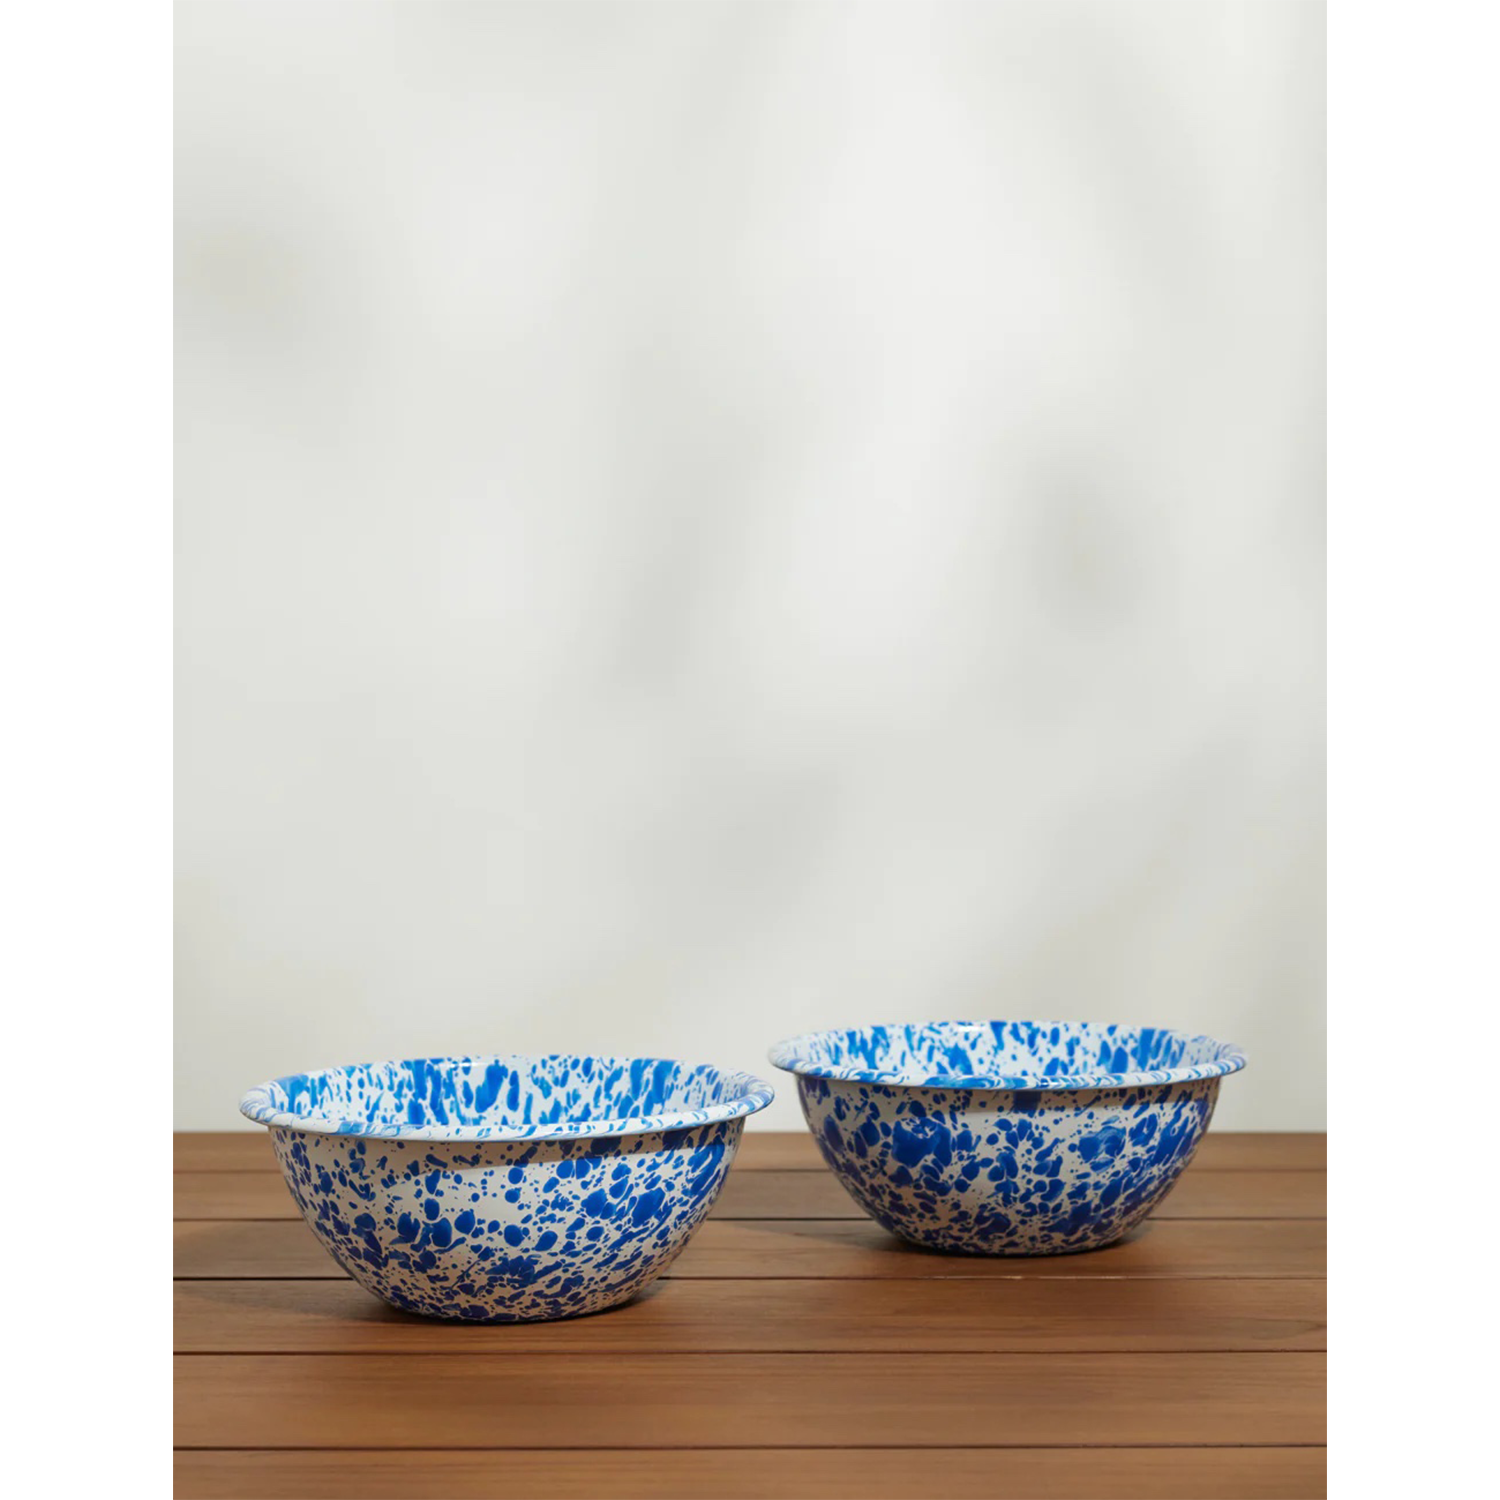 Enamelware Small Serve Bowl (Set Of 2) By Crow Canyon